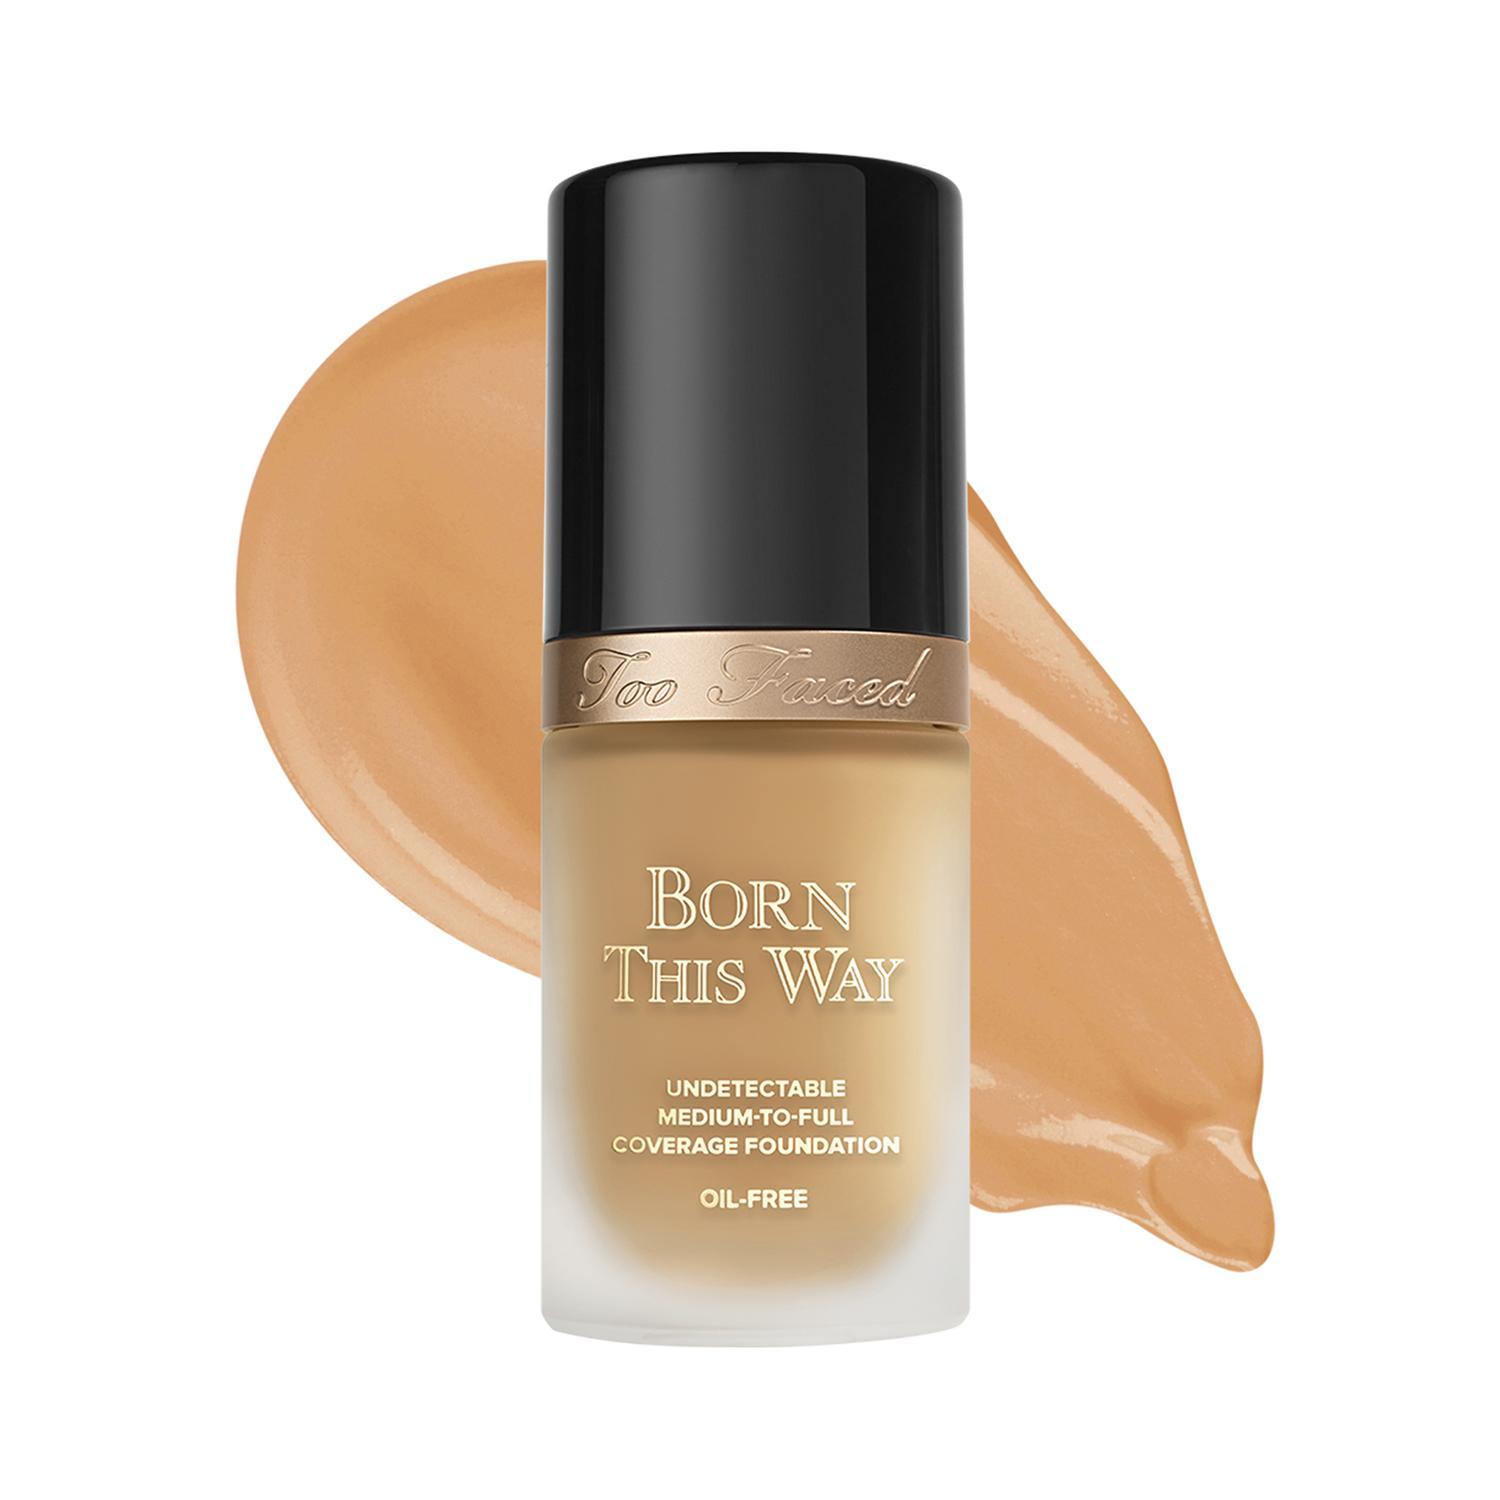 too faced born this way foundation - sand (30ml)